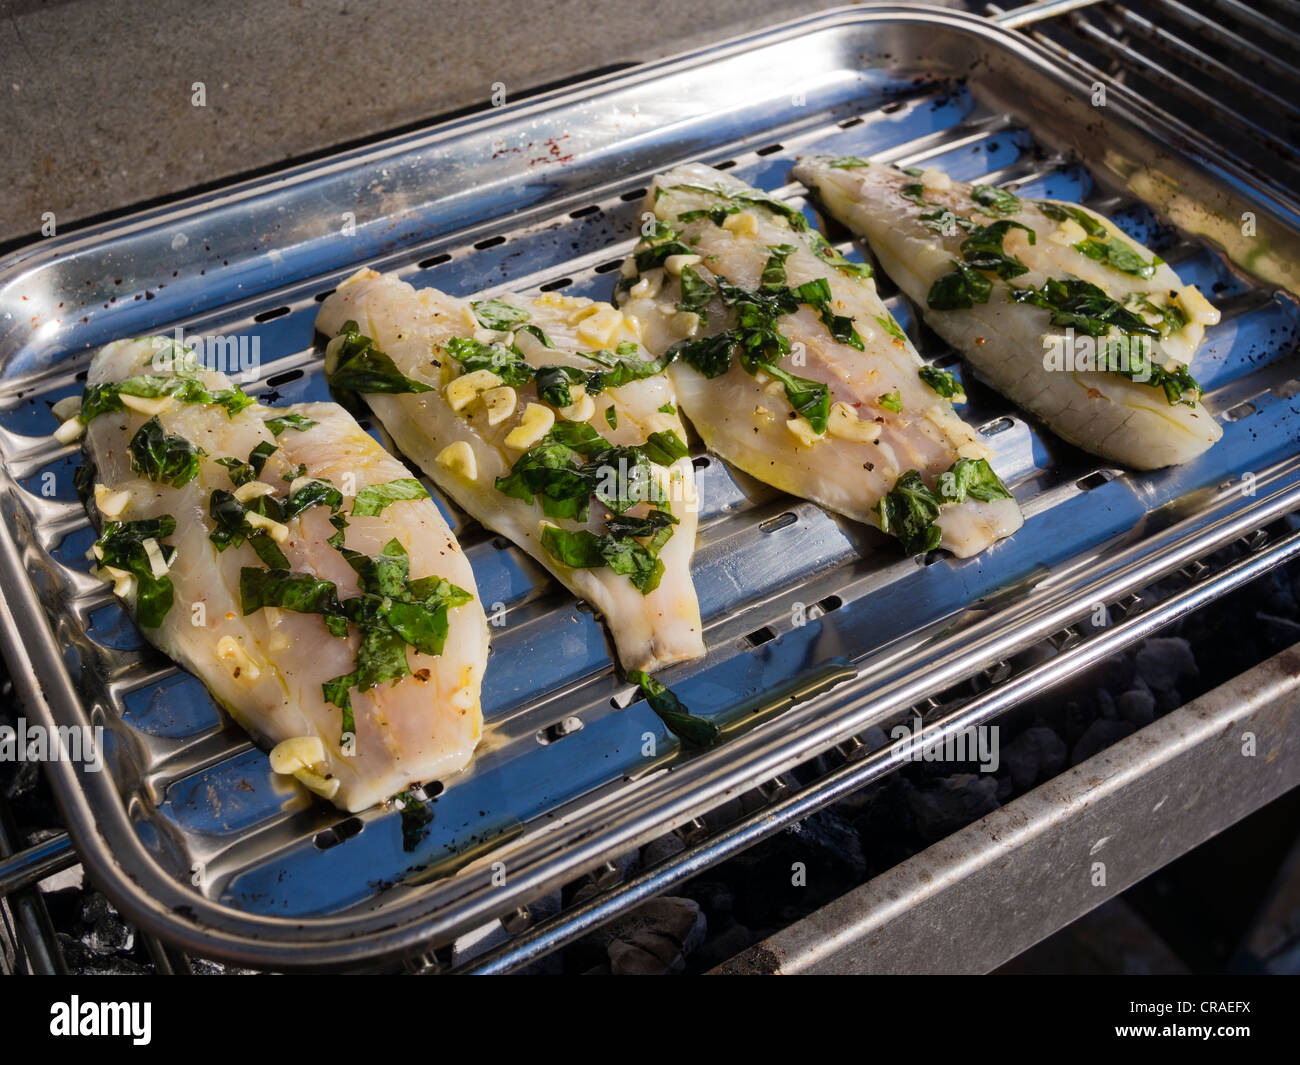 Gilthead seabream filets with basil and garlic are being grilled in a grill pan. Stock Photo